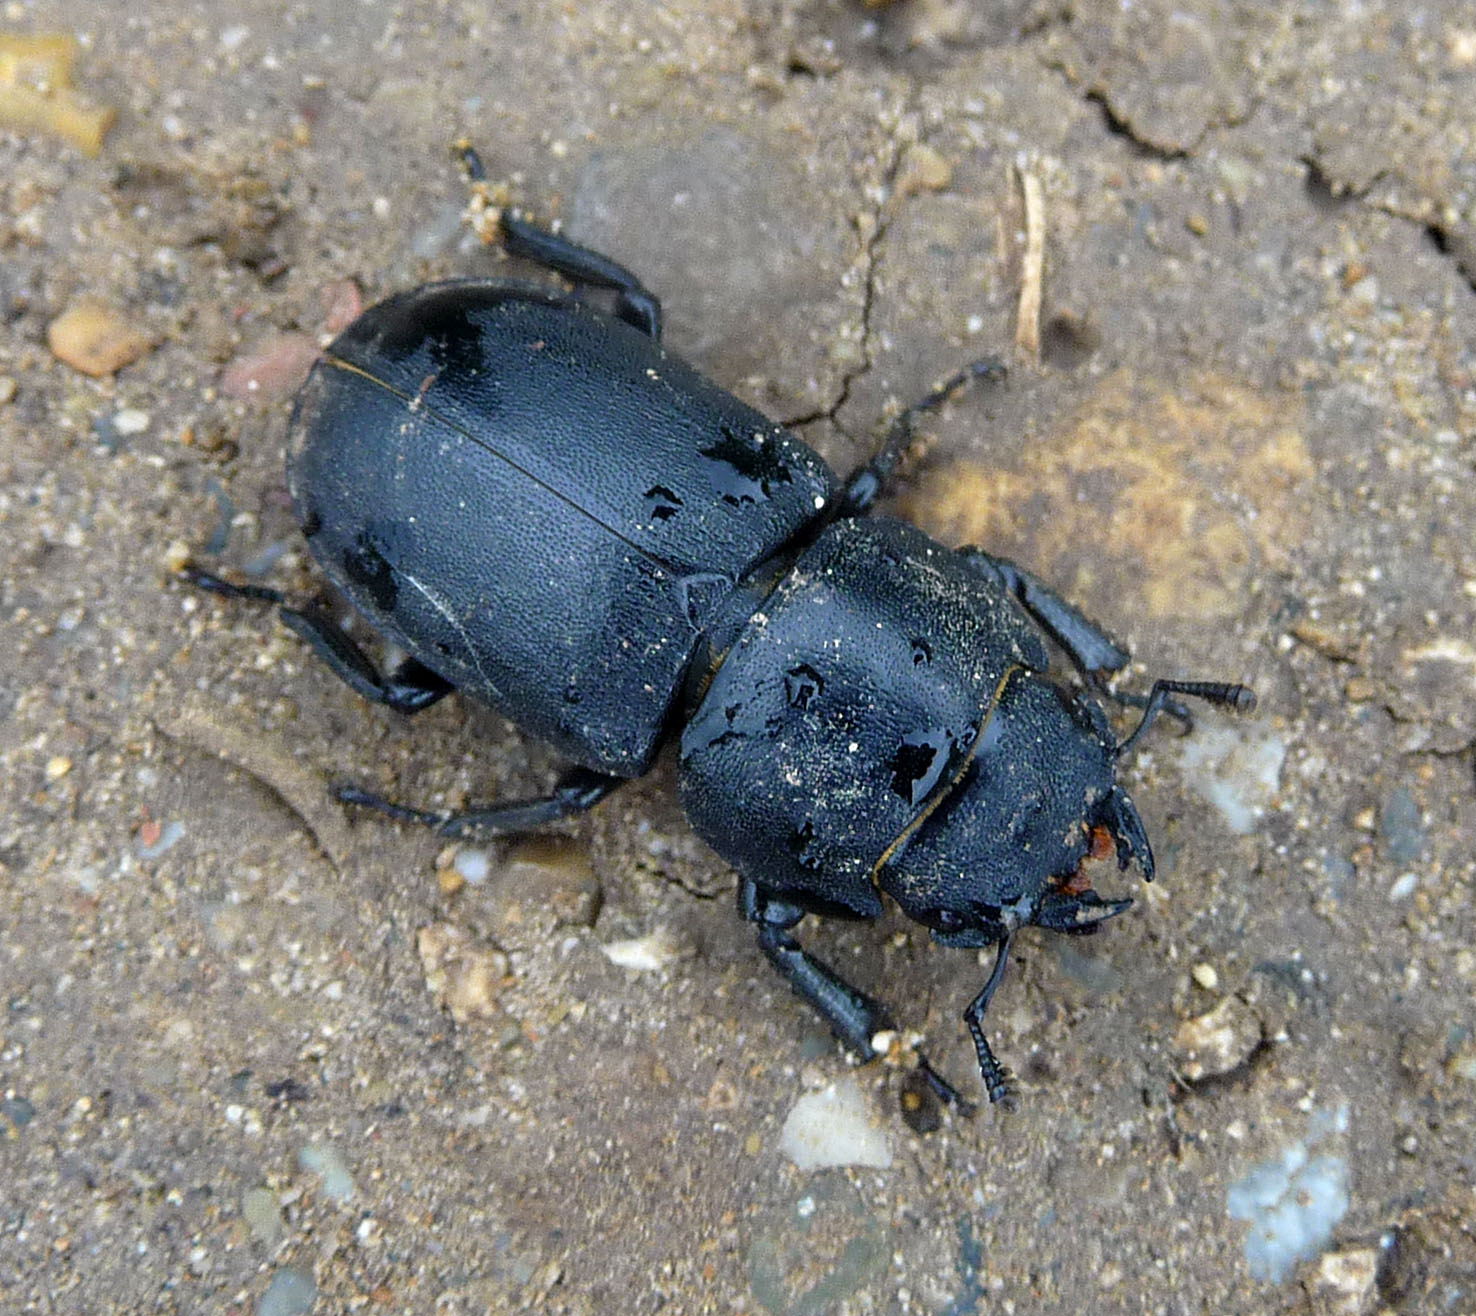 the very large beetle is on the ground